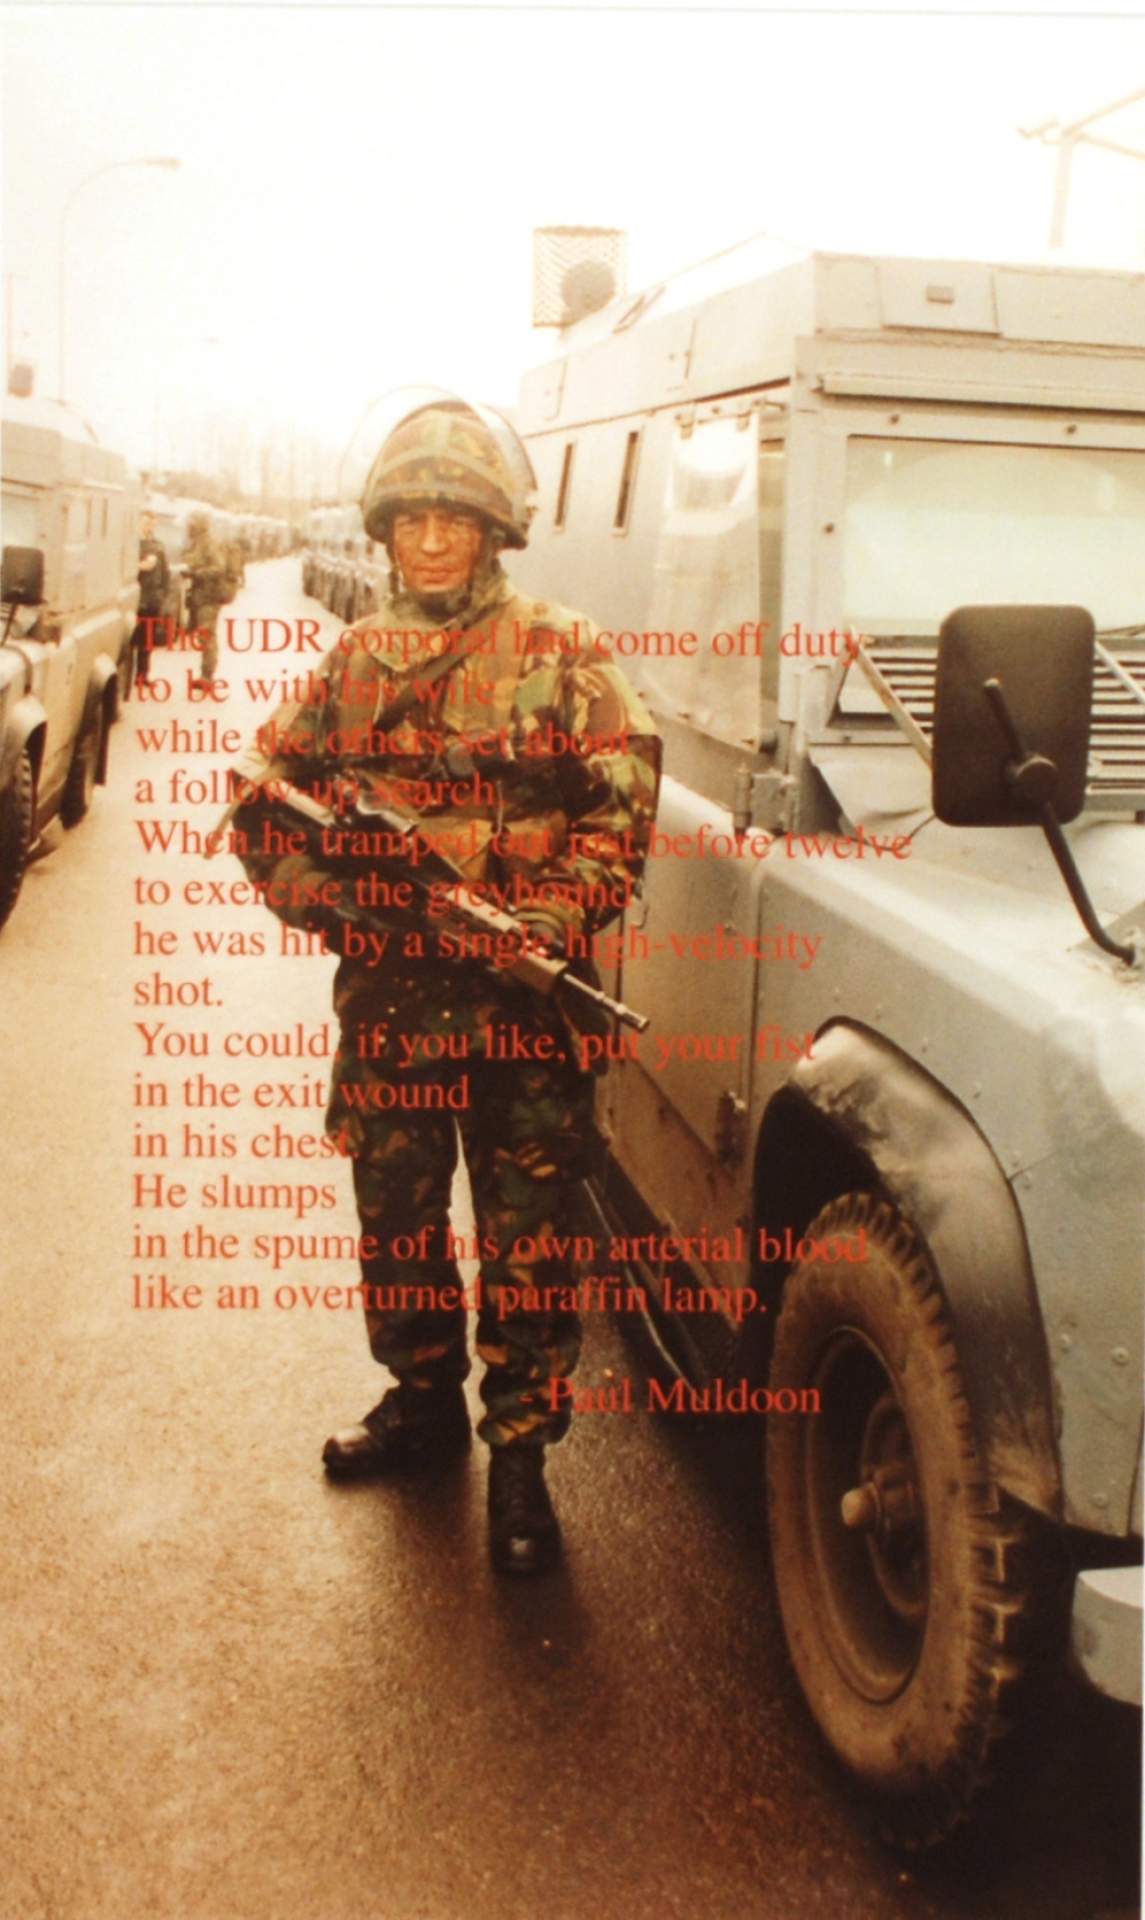 [soldier with poem by Paul Muldoon]